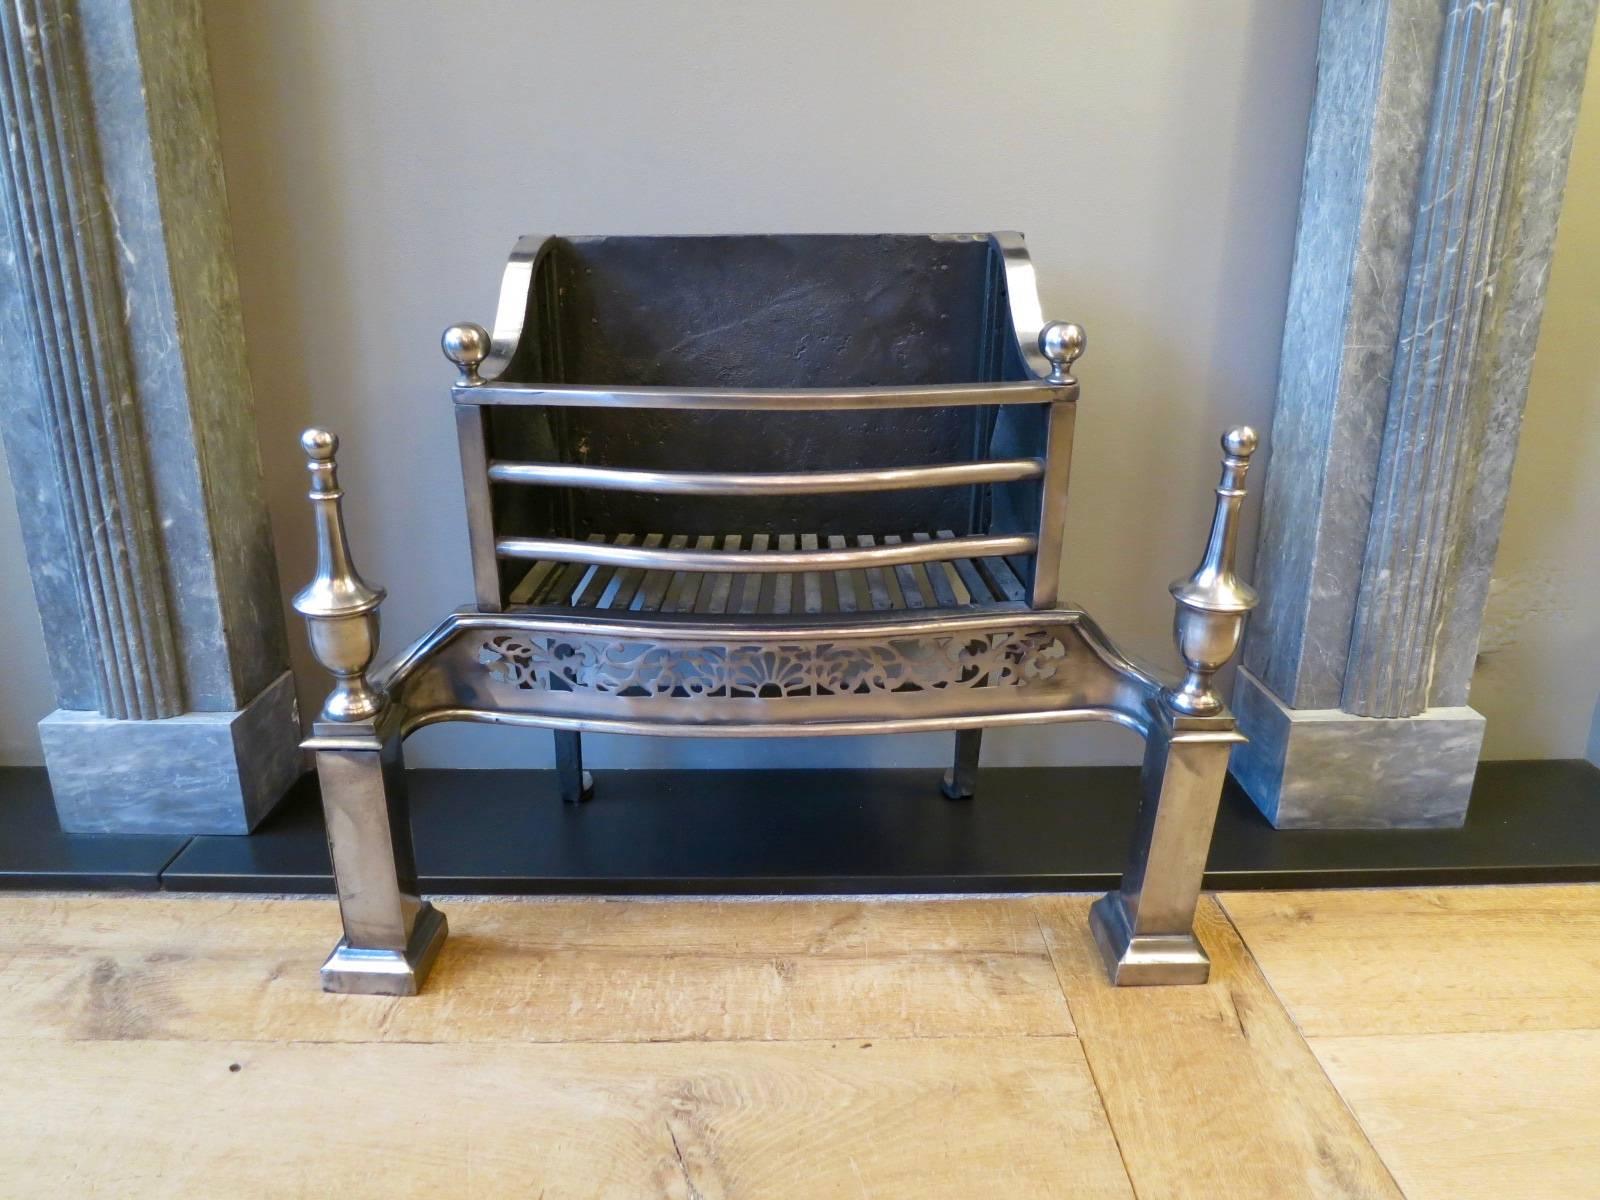 An English fire grate, in polished steel finish. The front columned supports surmounted by tall finials. The edged fret work of foliage and shell pattern, beneath gently curved bars with ball finials, late 19th century.